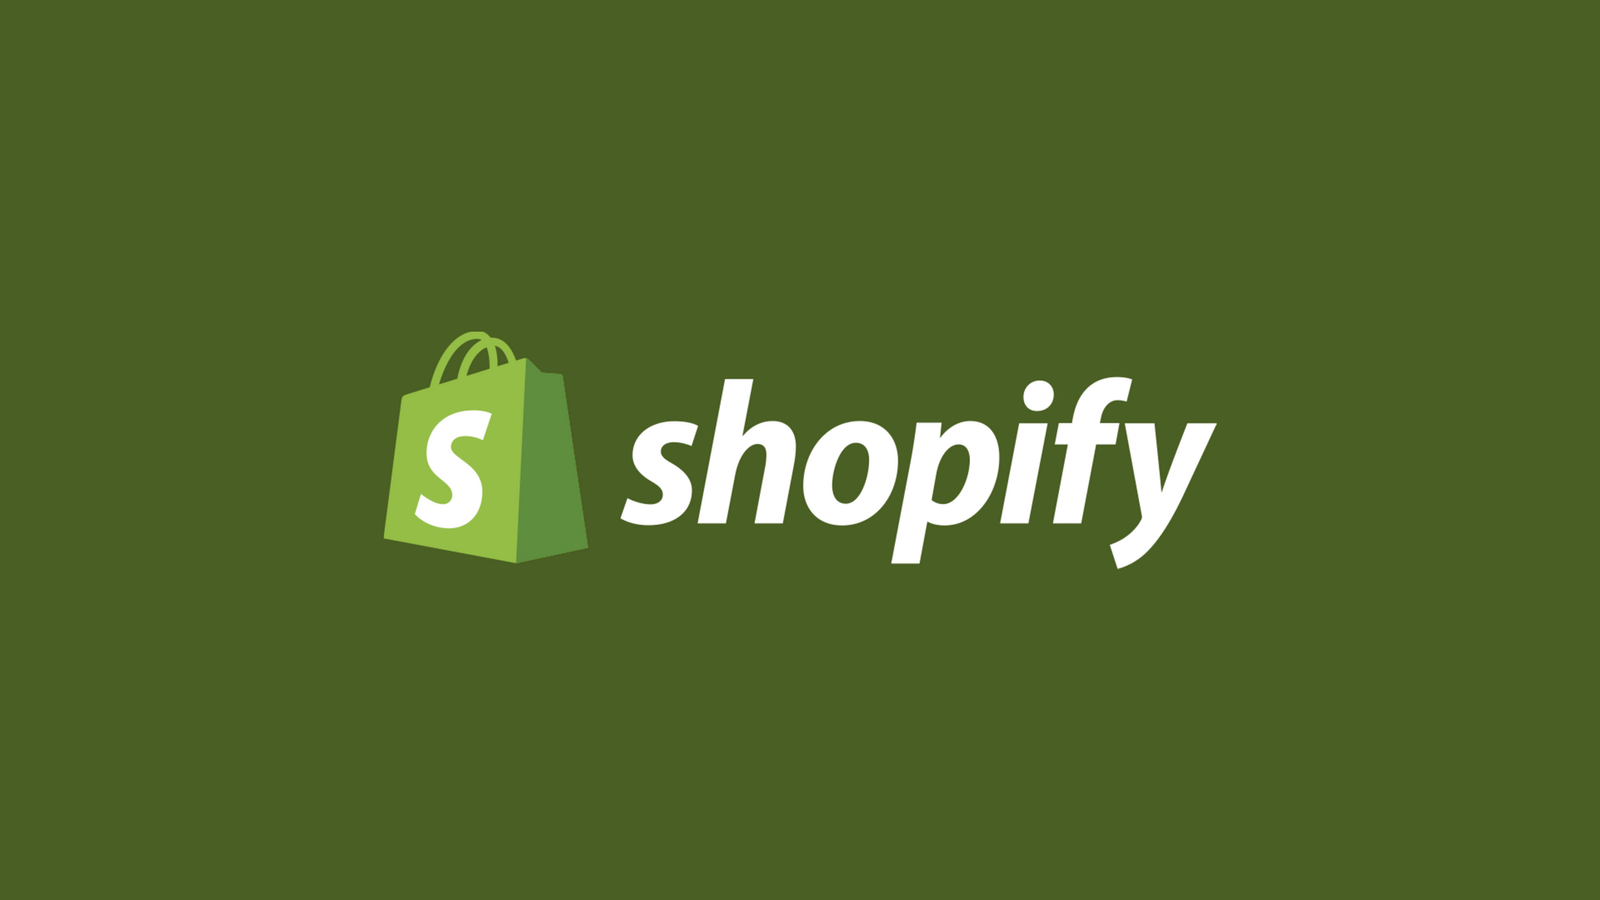 shopify shipping apps